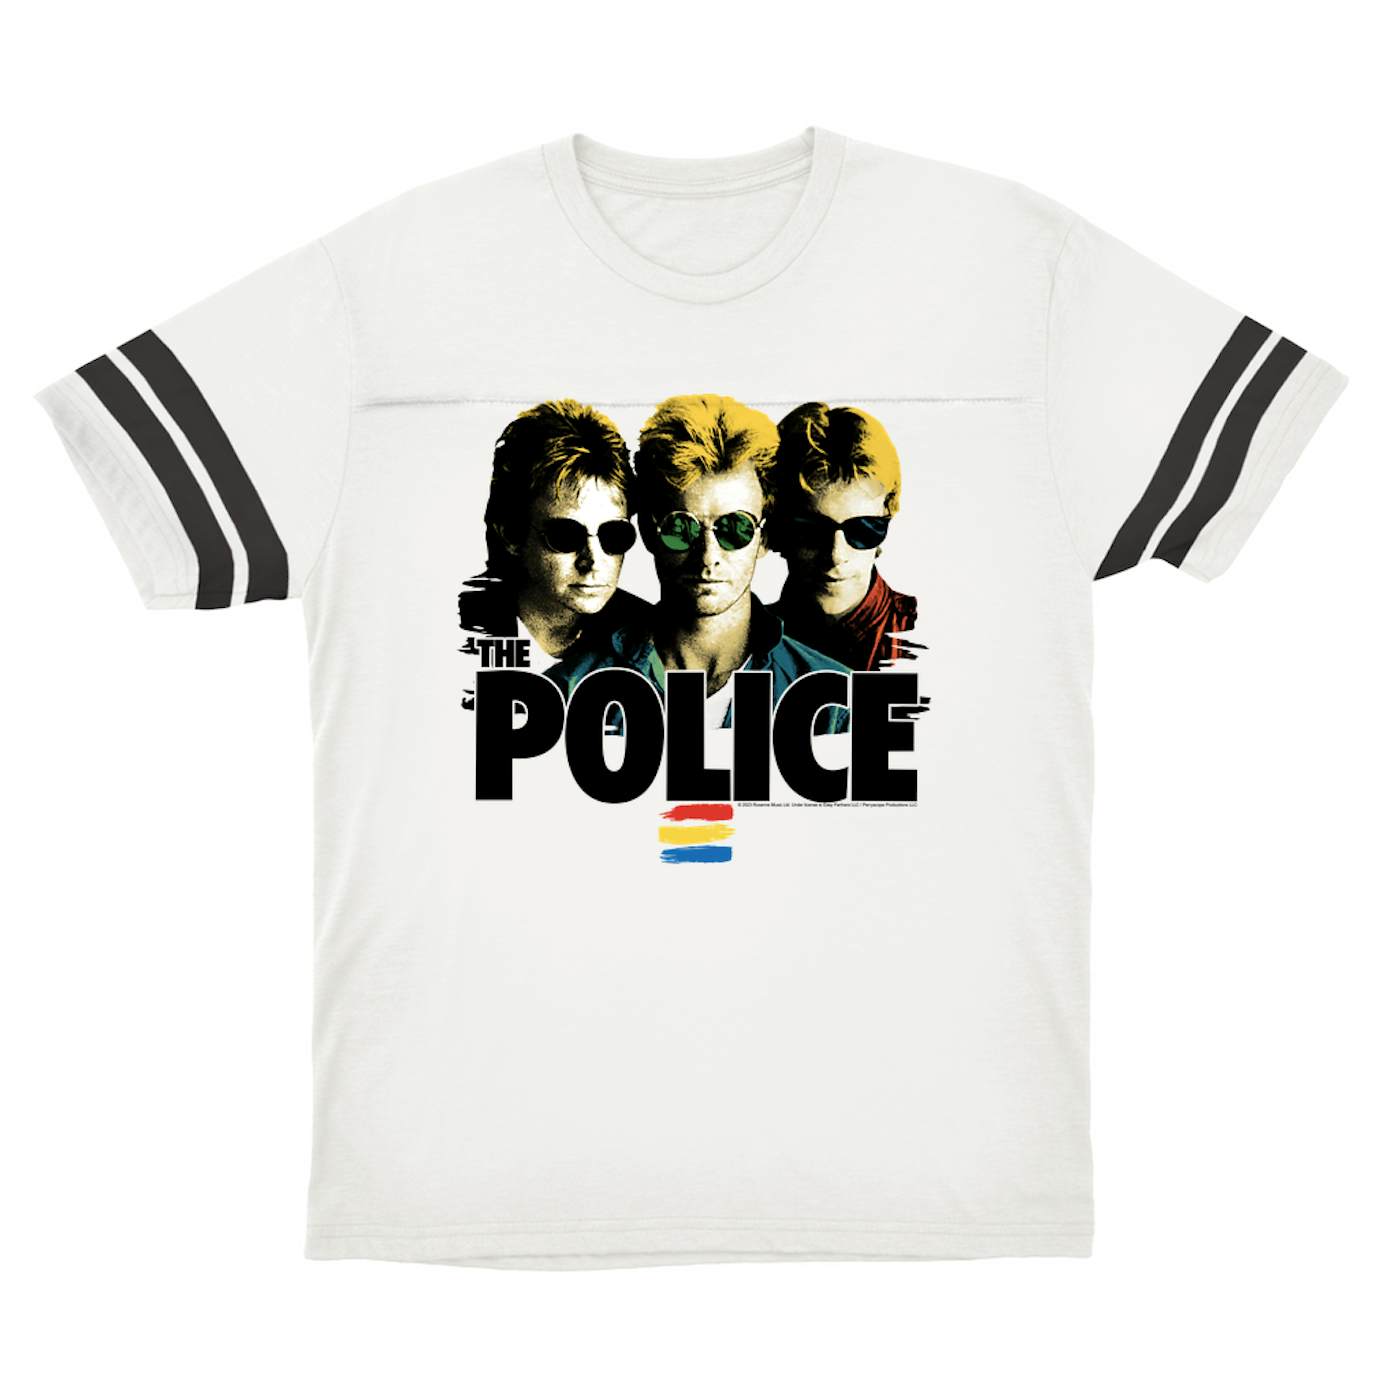 The Police T-Shirt | Synchronicity Shades Image (Merchbar Exclusive) The Police Football Shirt